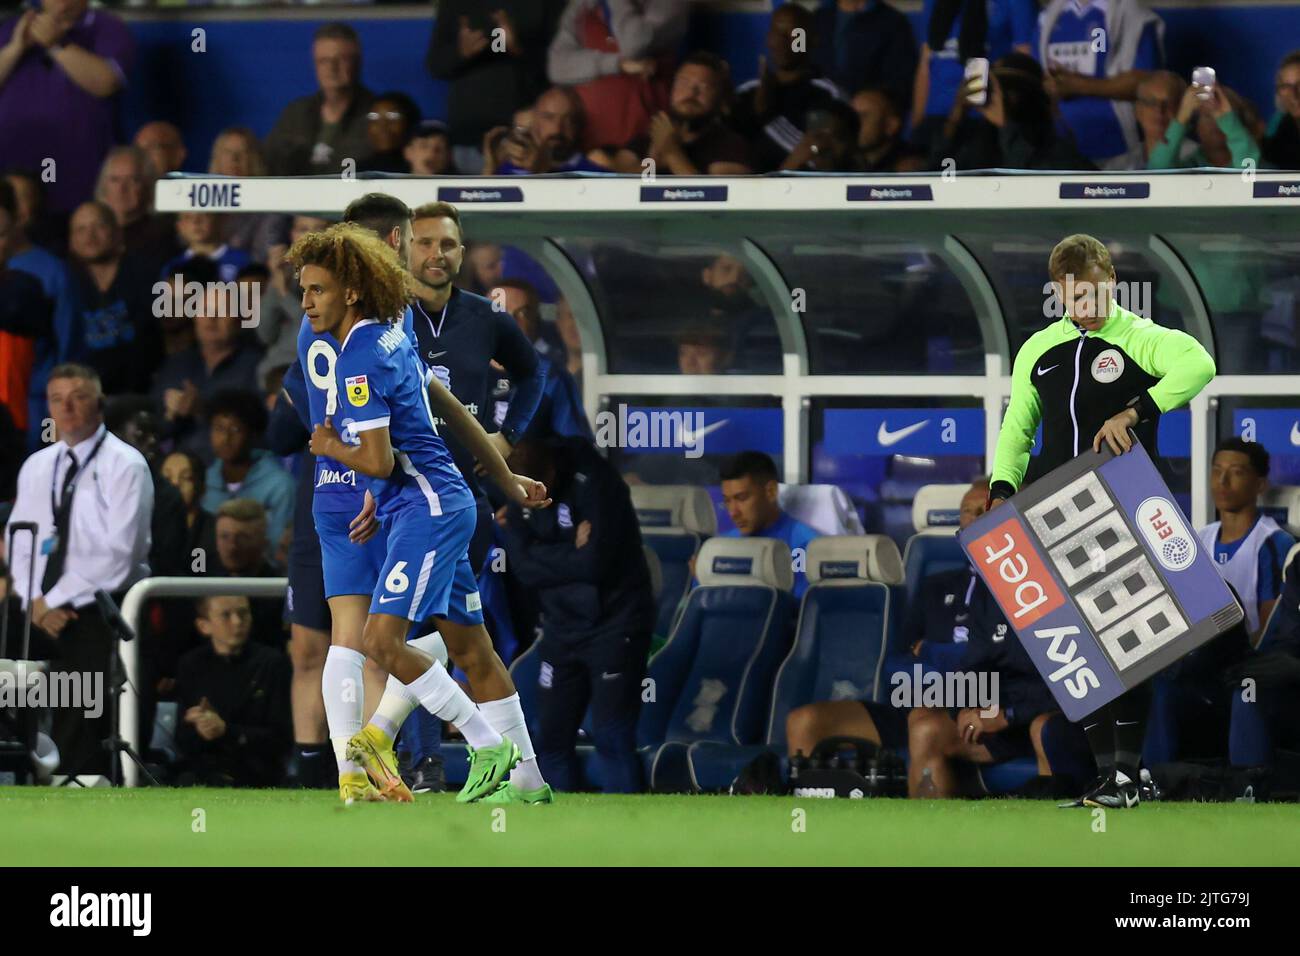 Hannibal Mejbri #6 of Birmingham City comes on for his debut Stock Photo